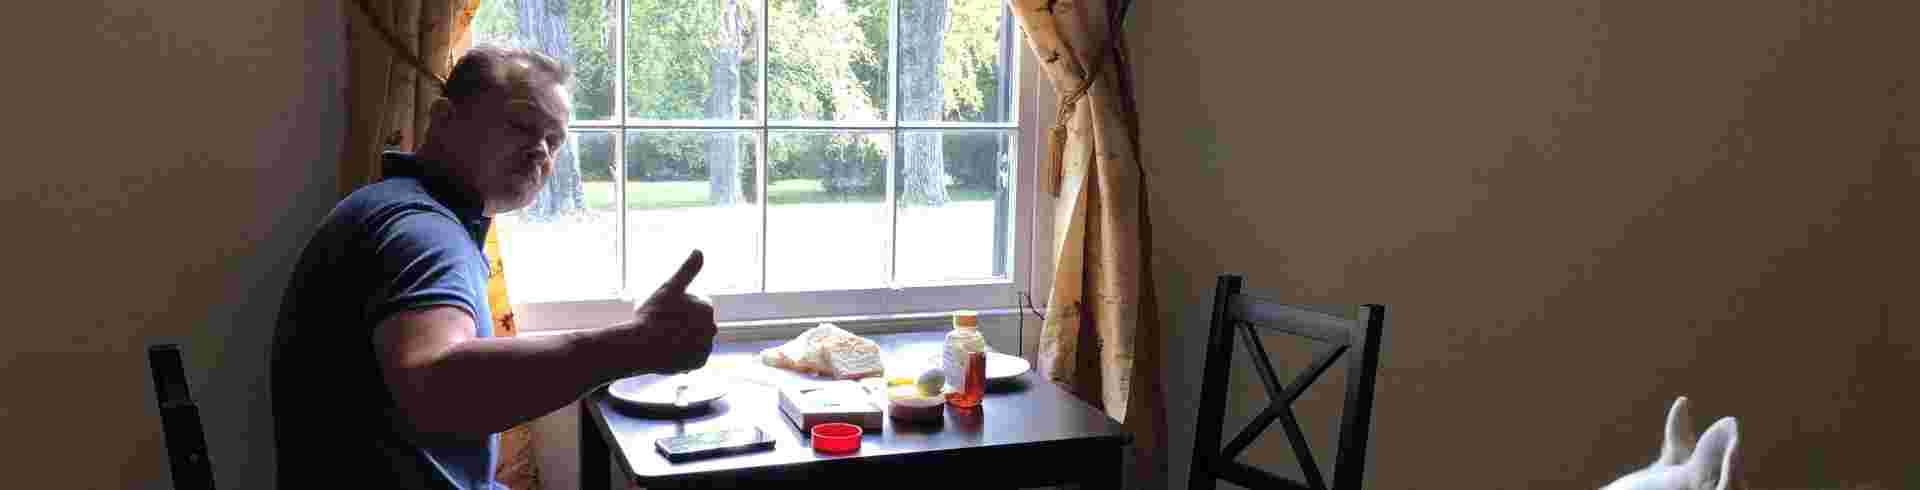 The Sunnyside Sisters Bed and Breakfast / Clarksville VA / The table next to the window